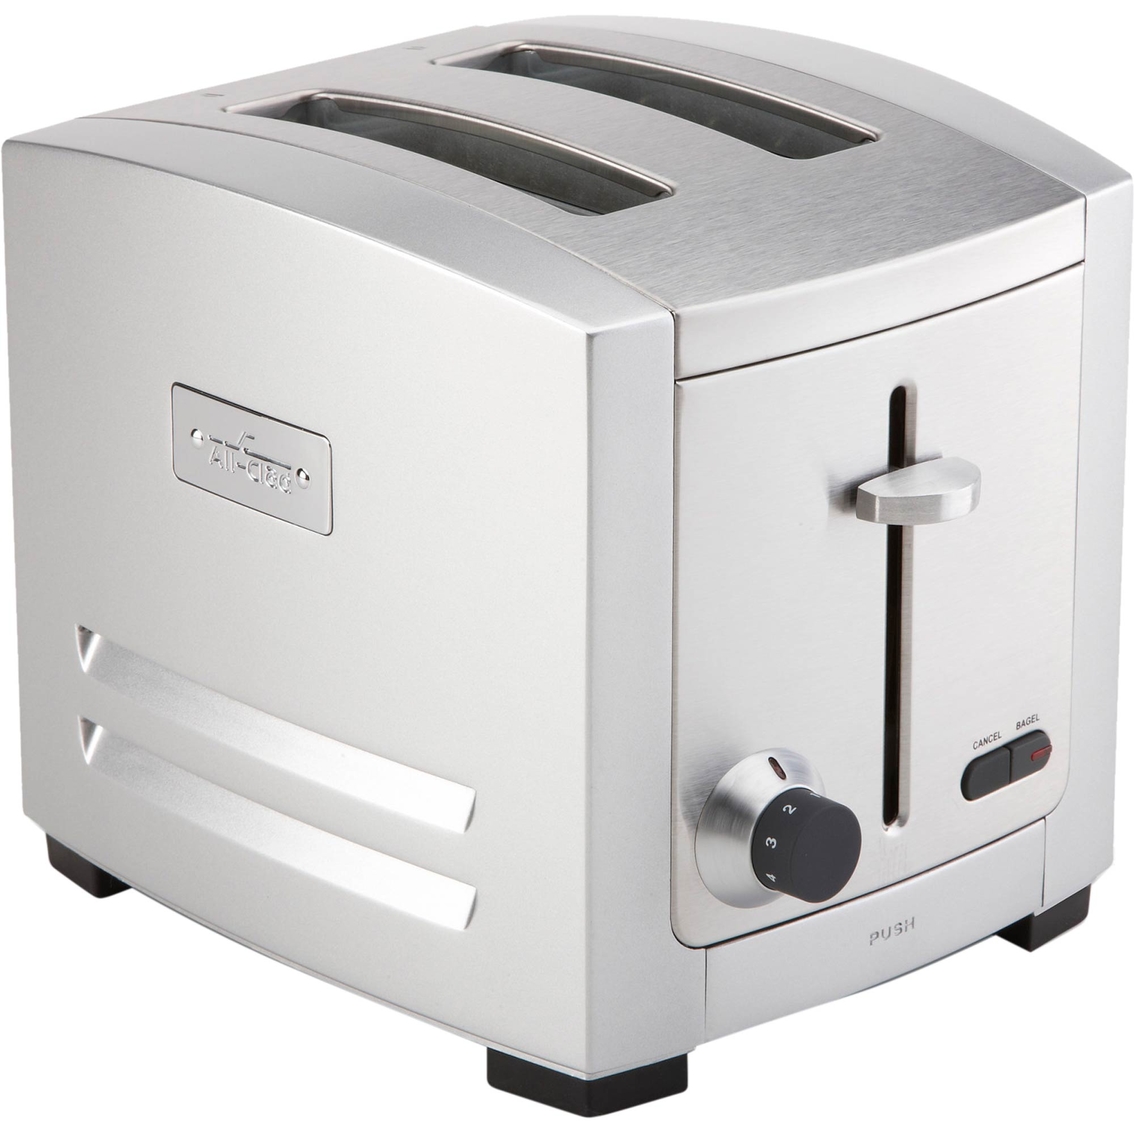 All-clad 2 Slice Stainless Steel Toaster | Toasters & Ovens | Furniture All Clad Stainless Steel Toaster